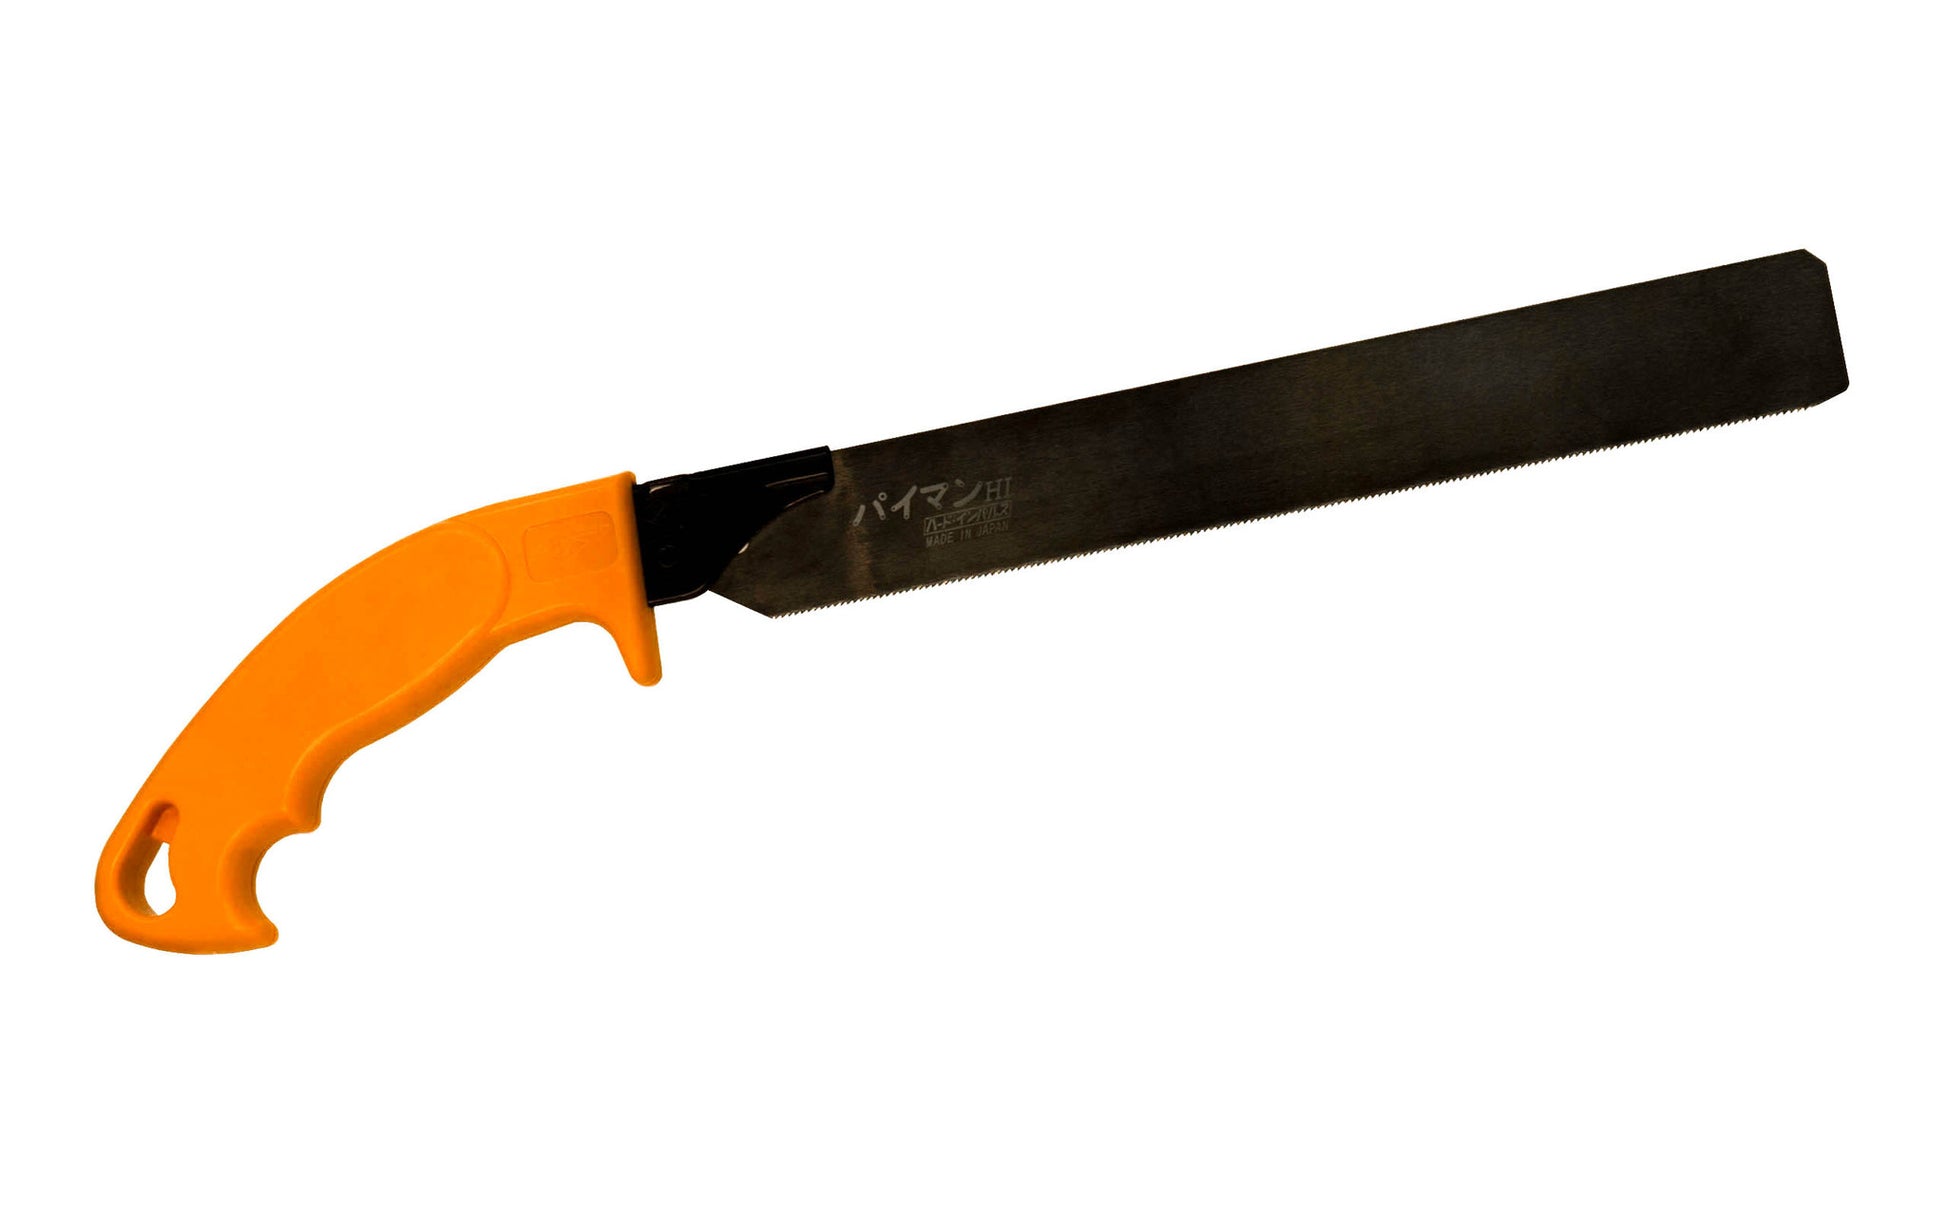 Made in Japan · 19 TPI ~ Non-ferrous metal cutting pull-saw ~ Impulse Hardened Teeth ~ 1-1/4" narrow blade - great for tight areas ~ Plastic pistol-grip handle ~ Blade is removable ~ Great for cutting non-ferrous metals including brass, copper, lead & aluminum